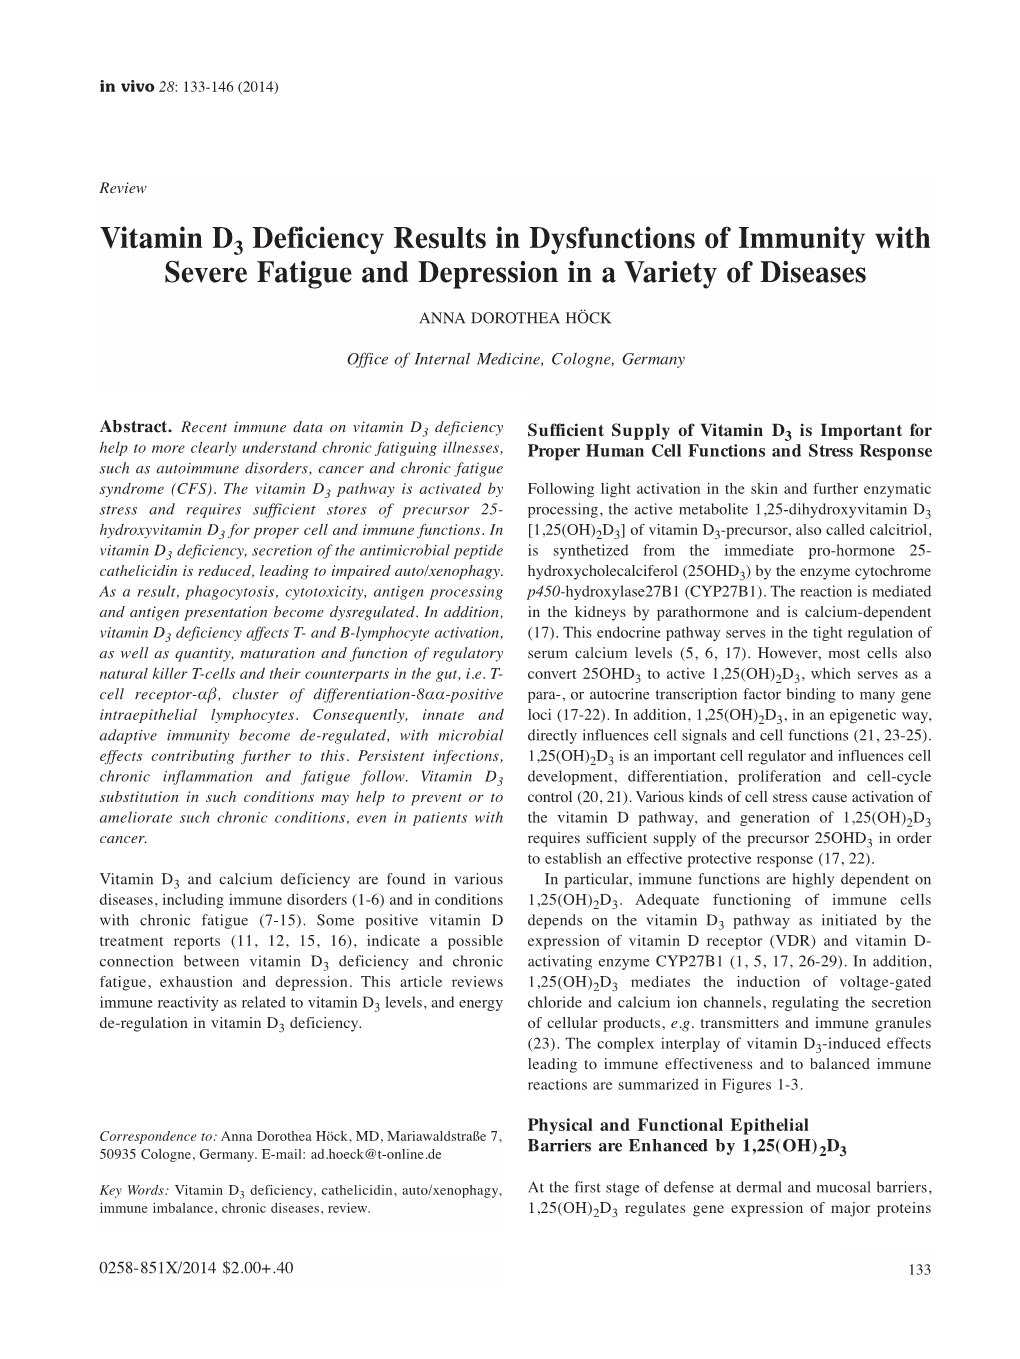 Vitamin D3 Deficiency Results in Dysfunctions of Immunity with Severe Fatigue and Depression in a Variety of Diseases